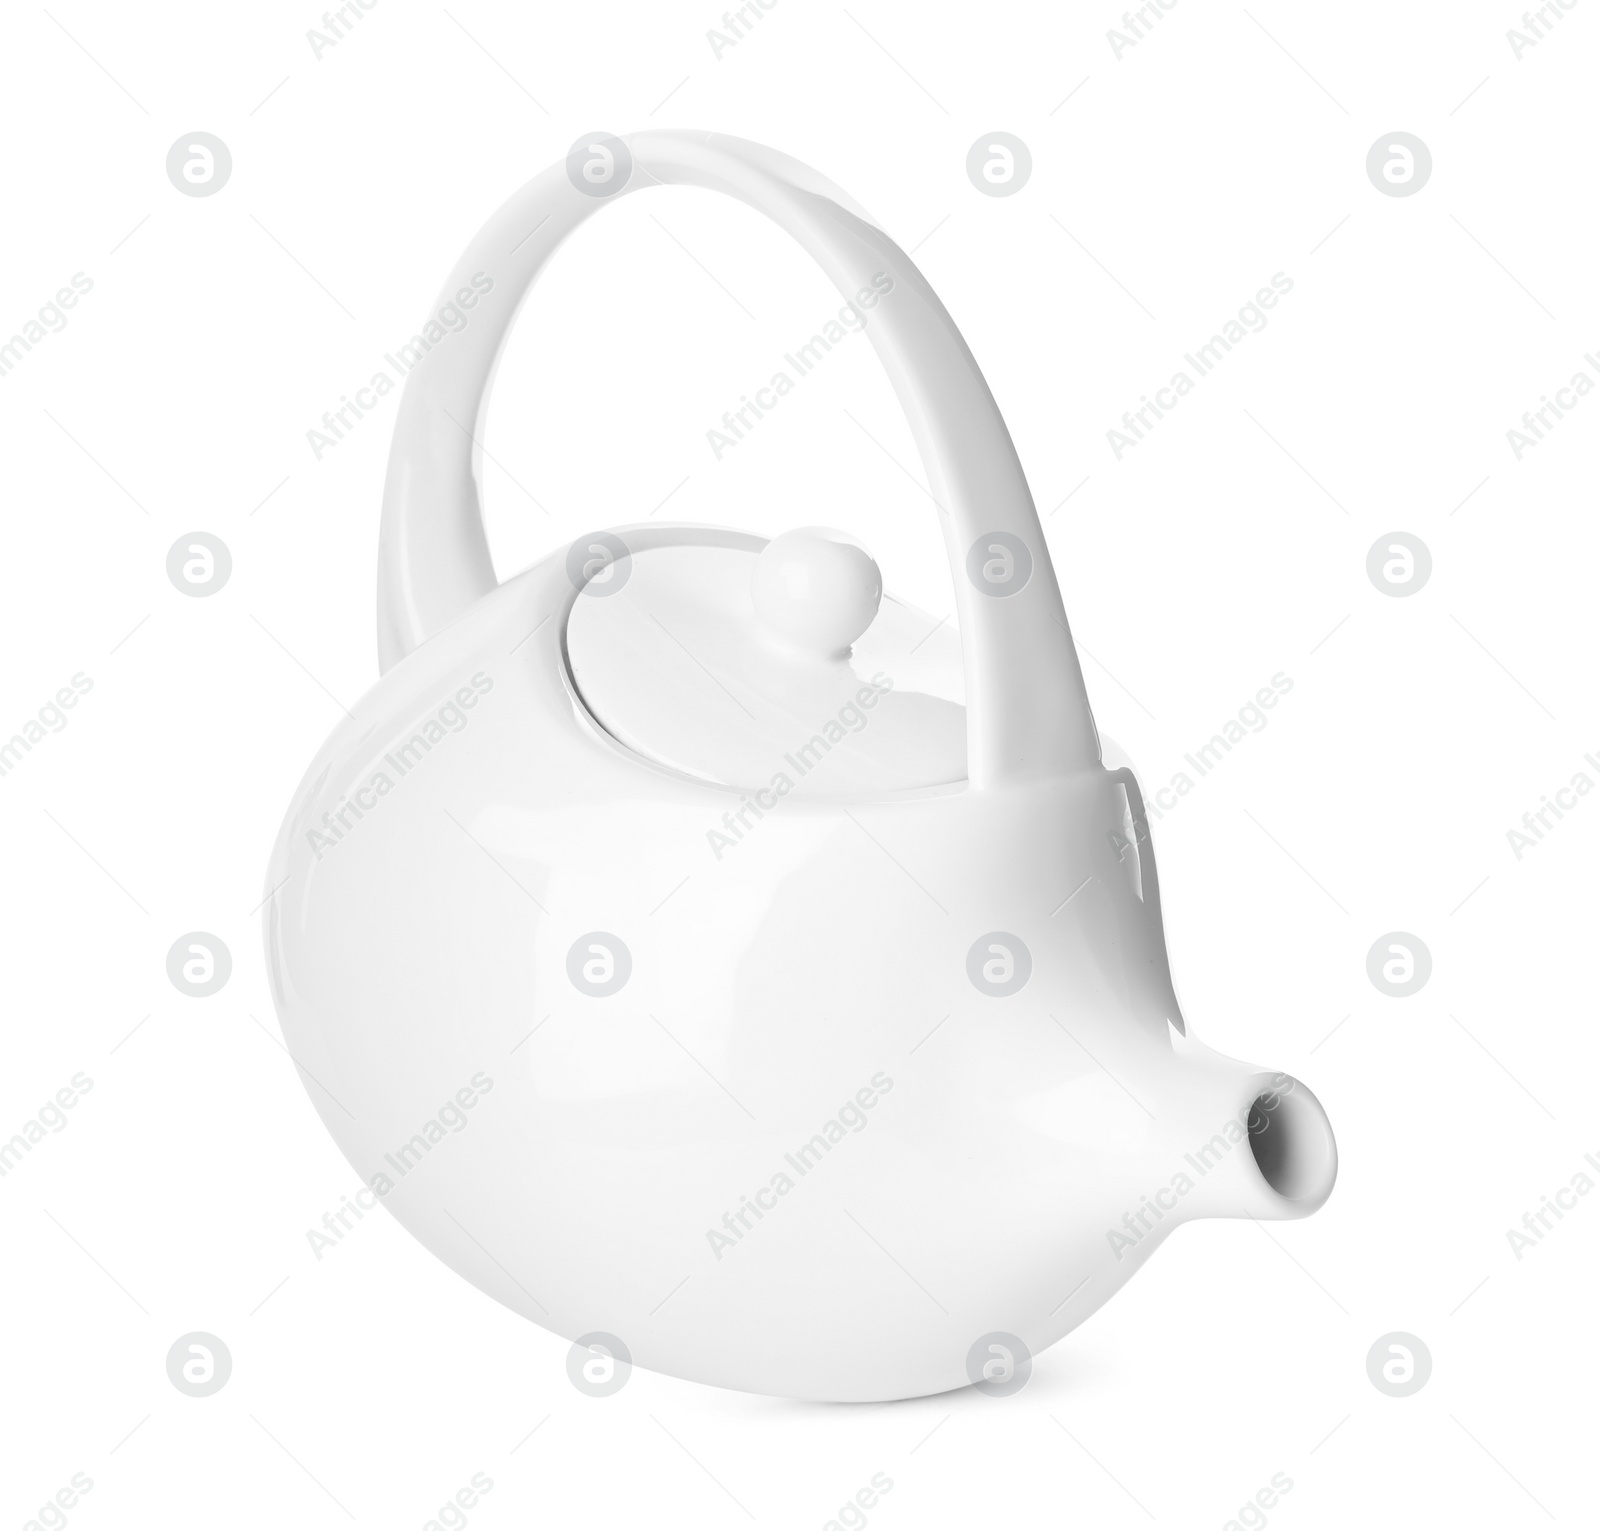 Photo of Clean empty ceramic teapot isolated on white